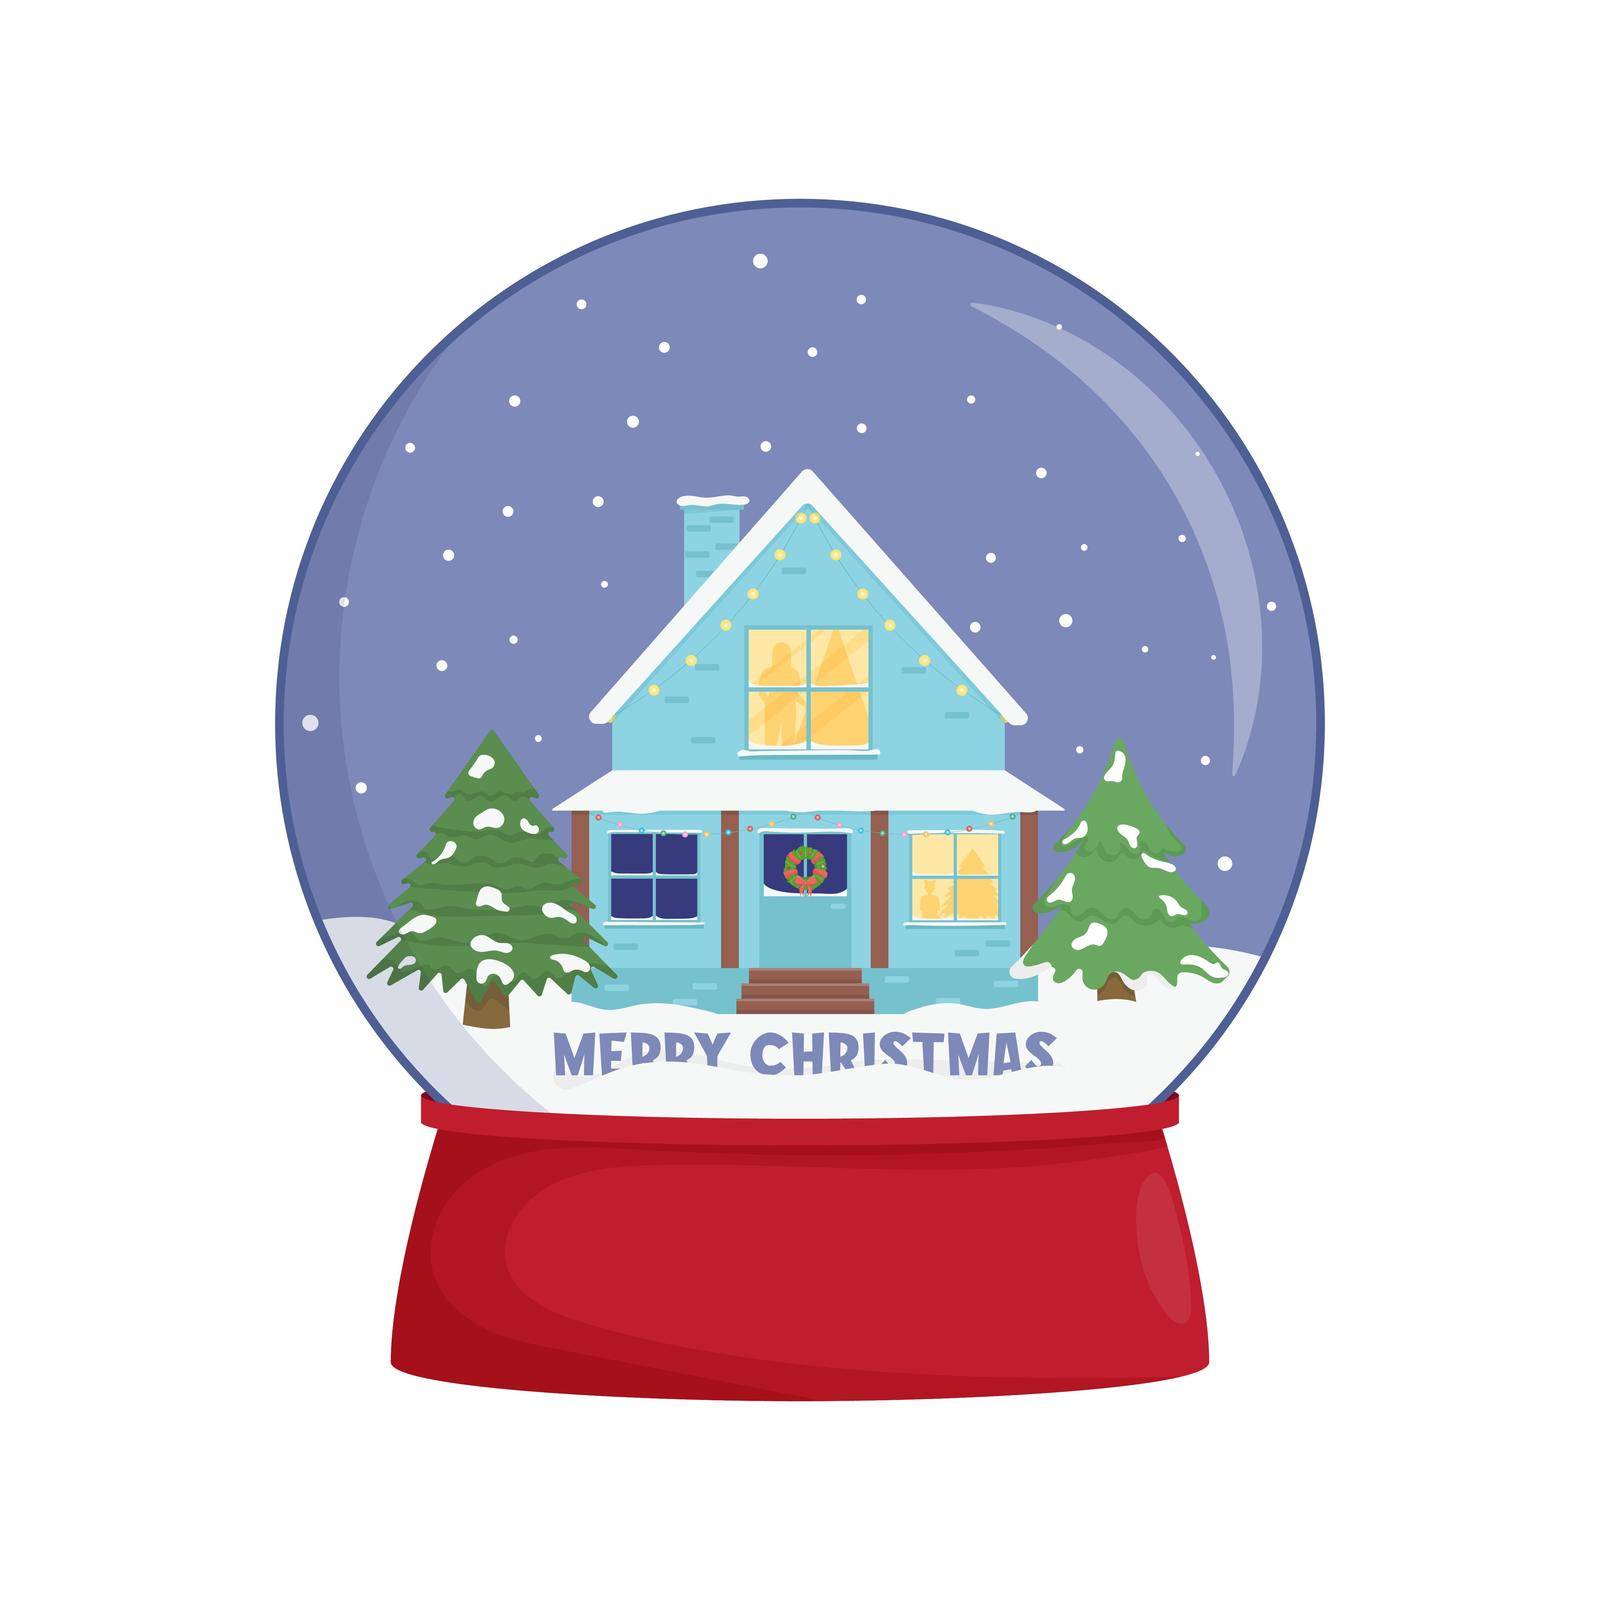 Snow globe with a town. Winter wonderland scenes in a snow globe